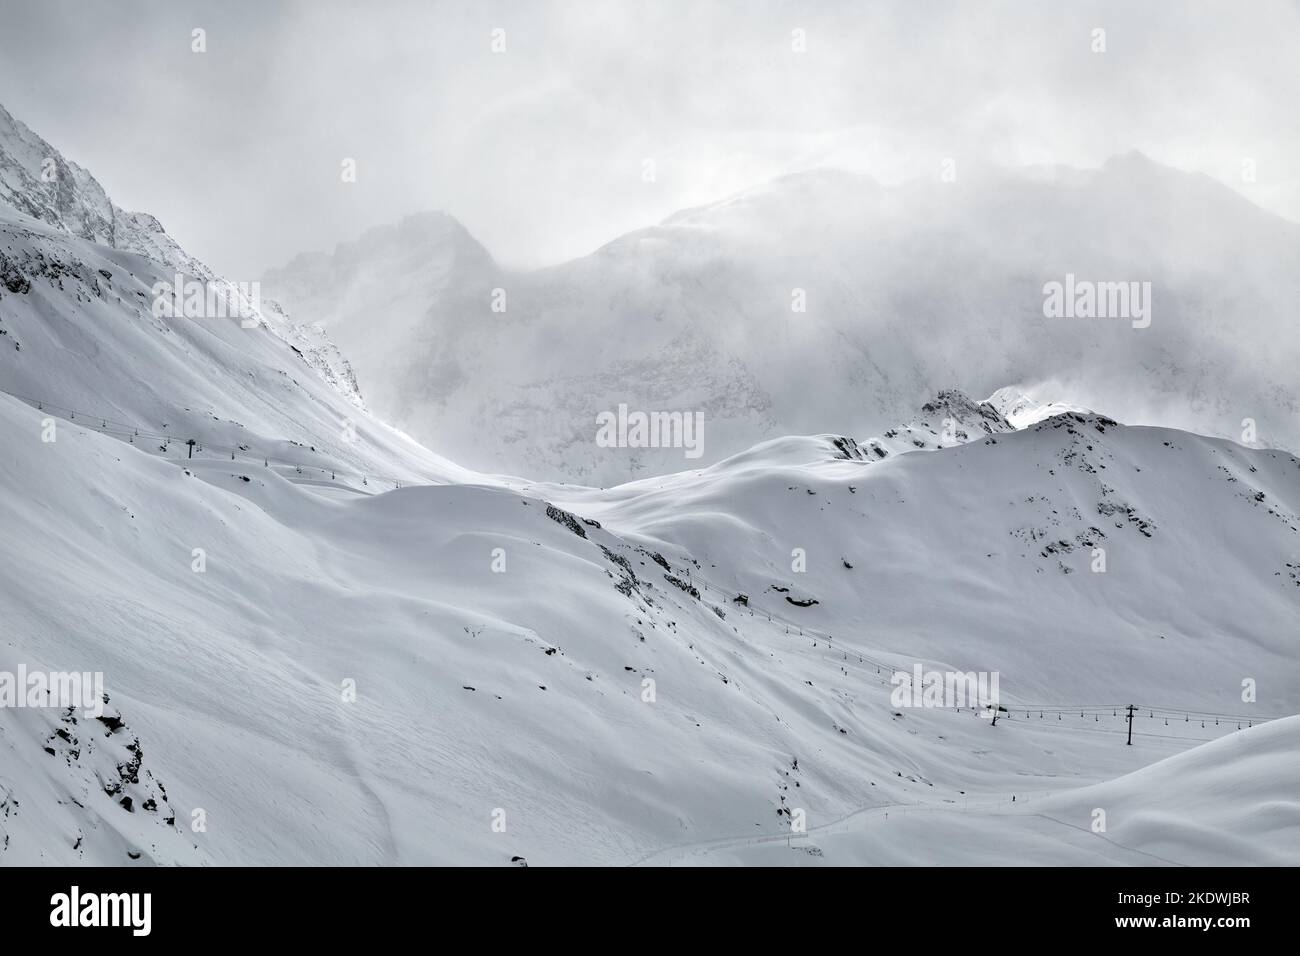 Skiing slopes from the top Stock Photo